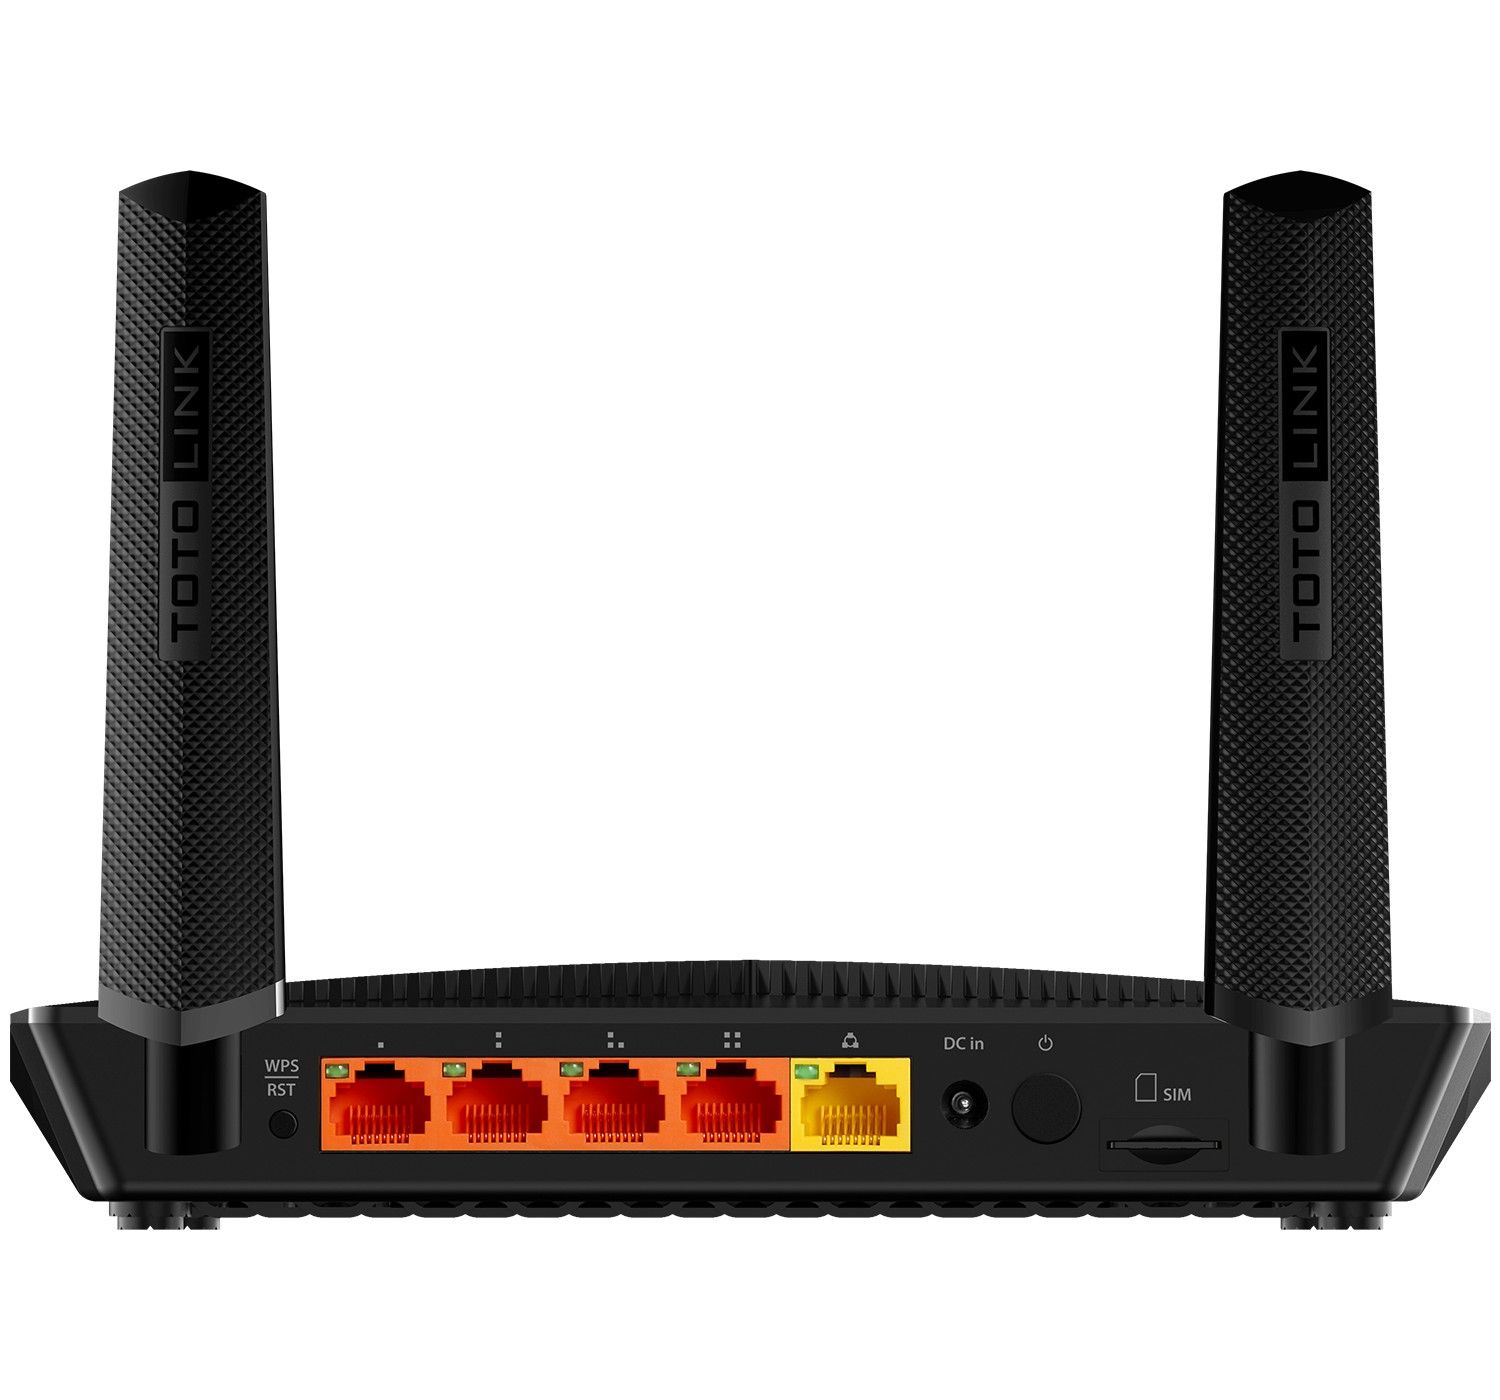 Totolink LR1200 | Router WiFi, AC1200 Dual Band, 4G LTE